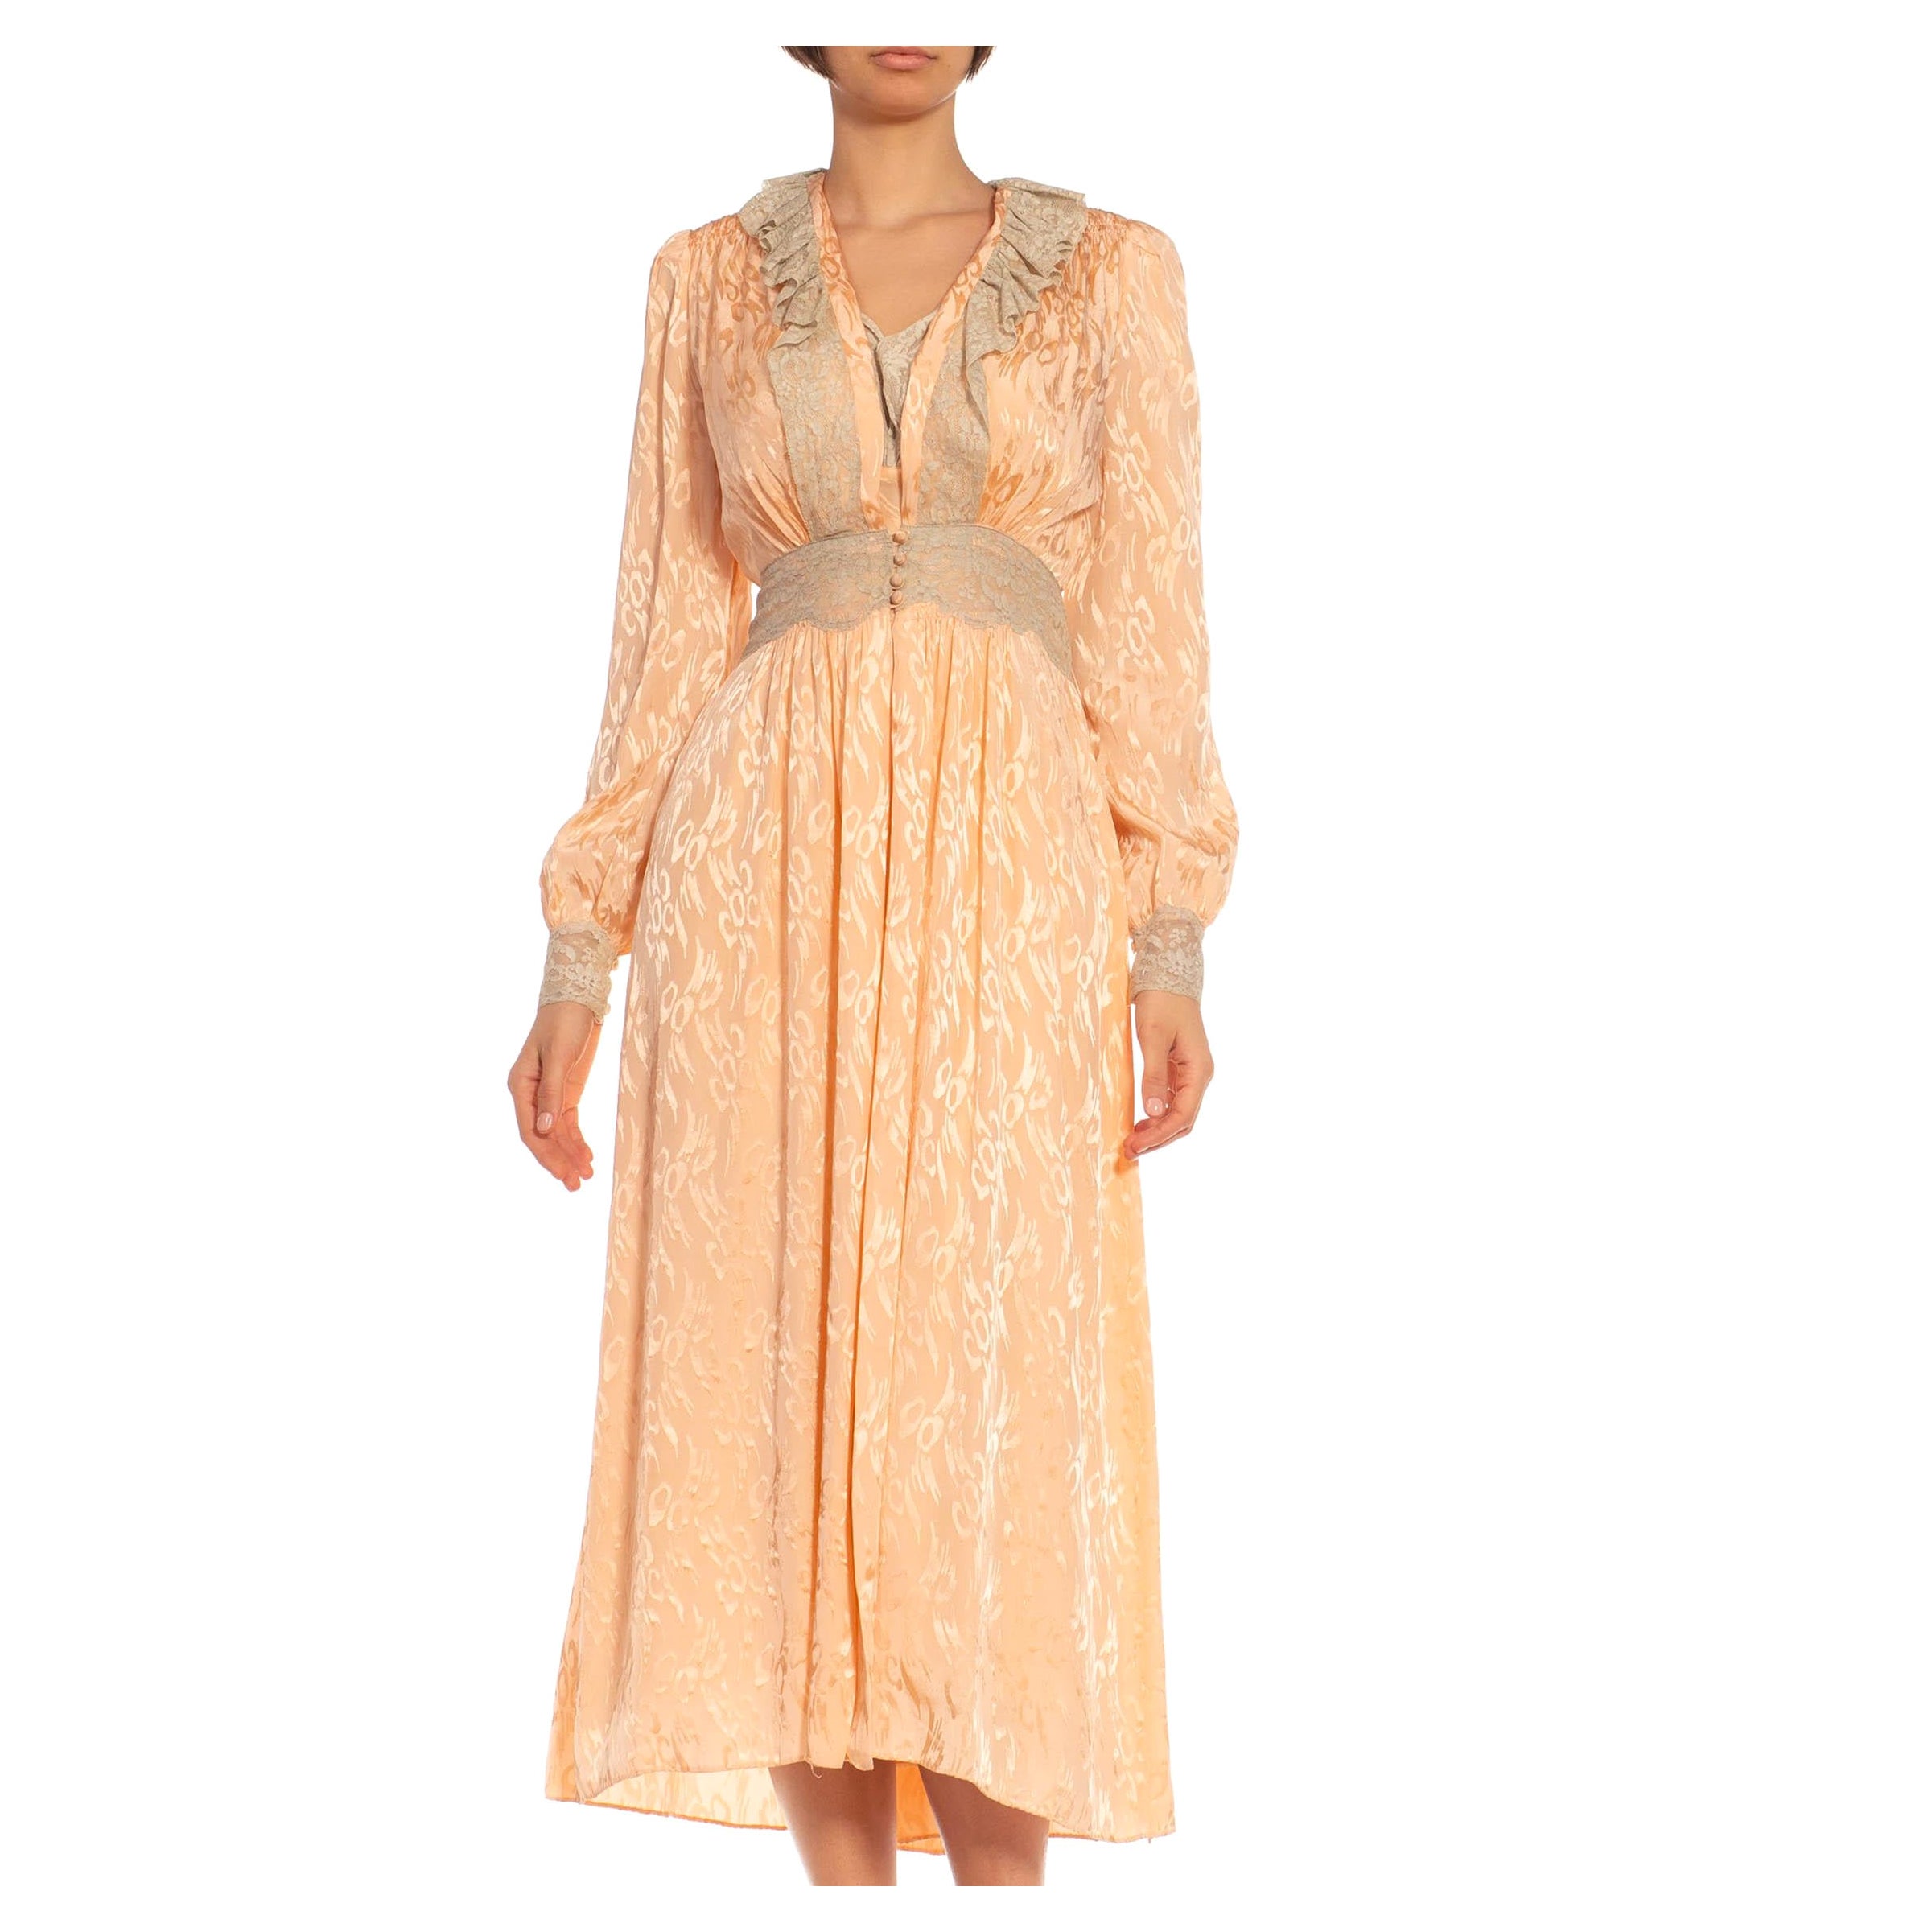 1940S Peach & Cream Lace Bias Cut Slip Dress With Jacket For Sale